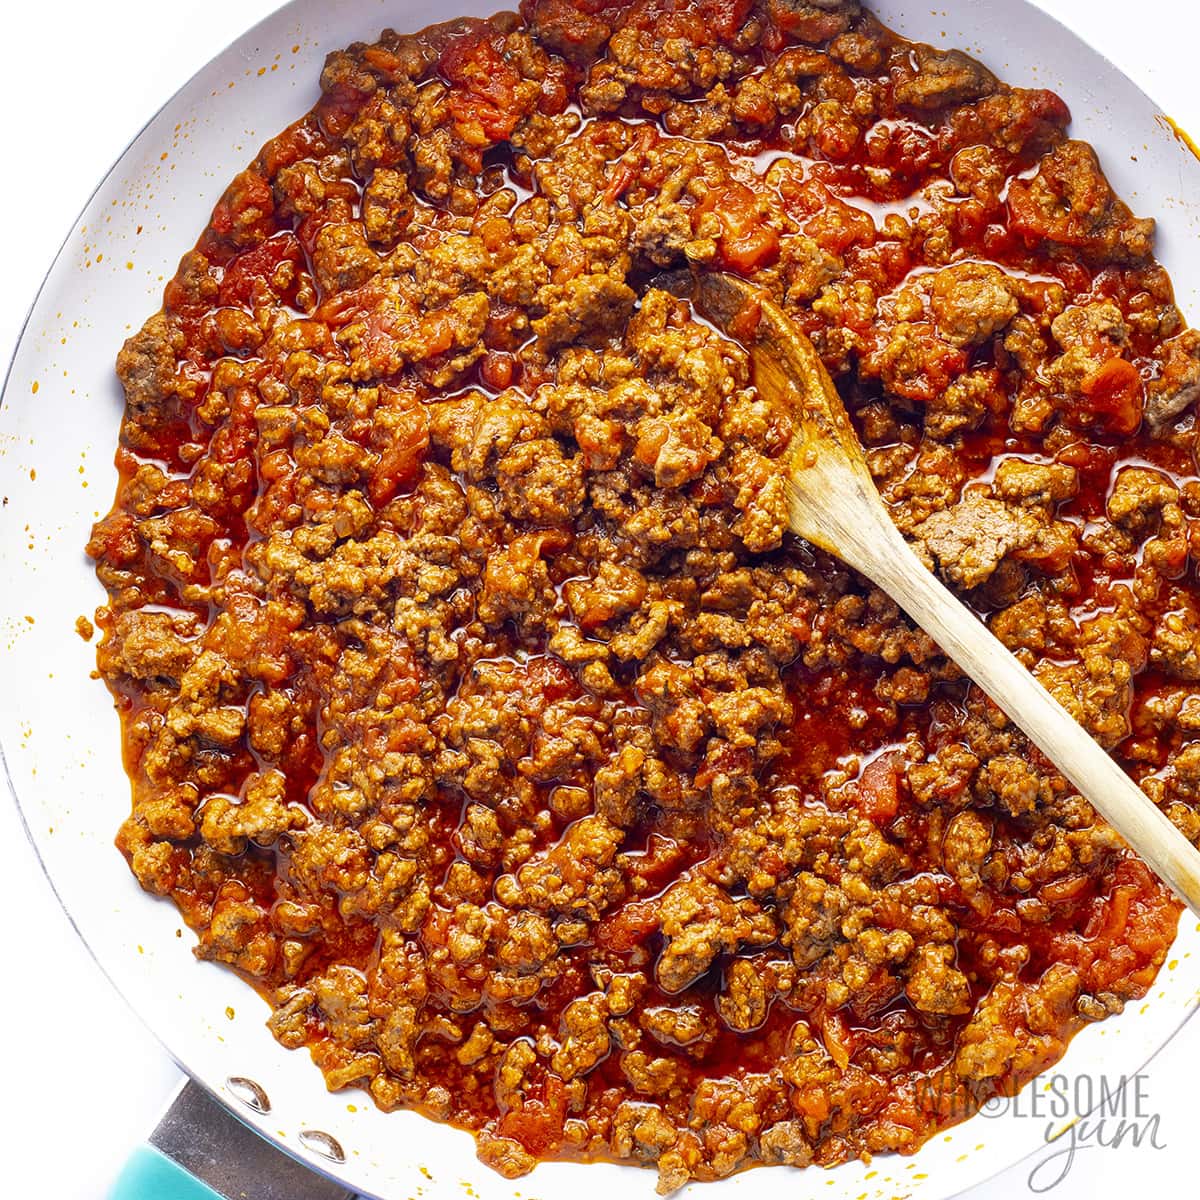 Tomato meat sauce in a skillet.